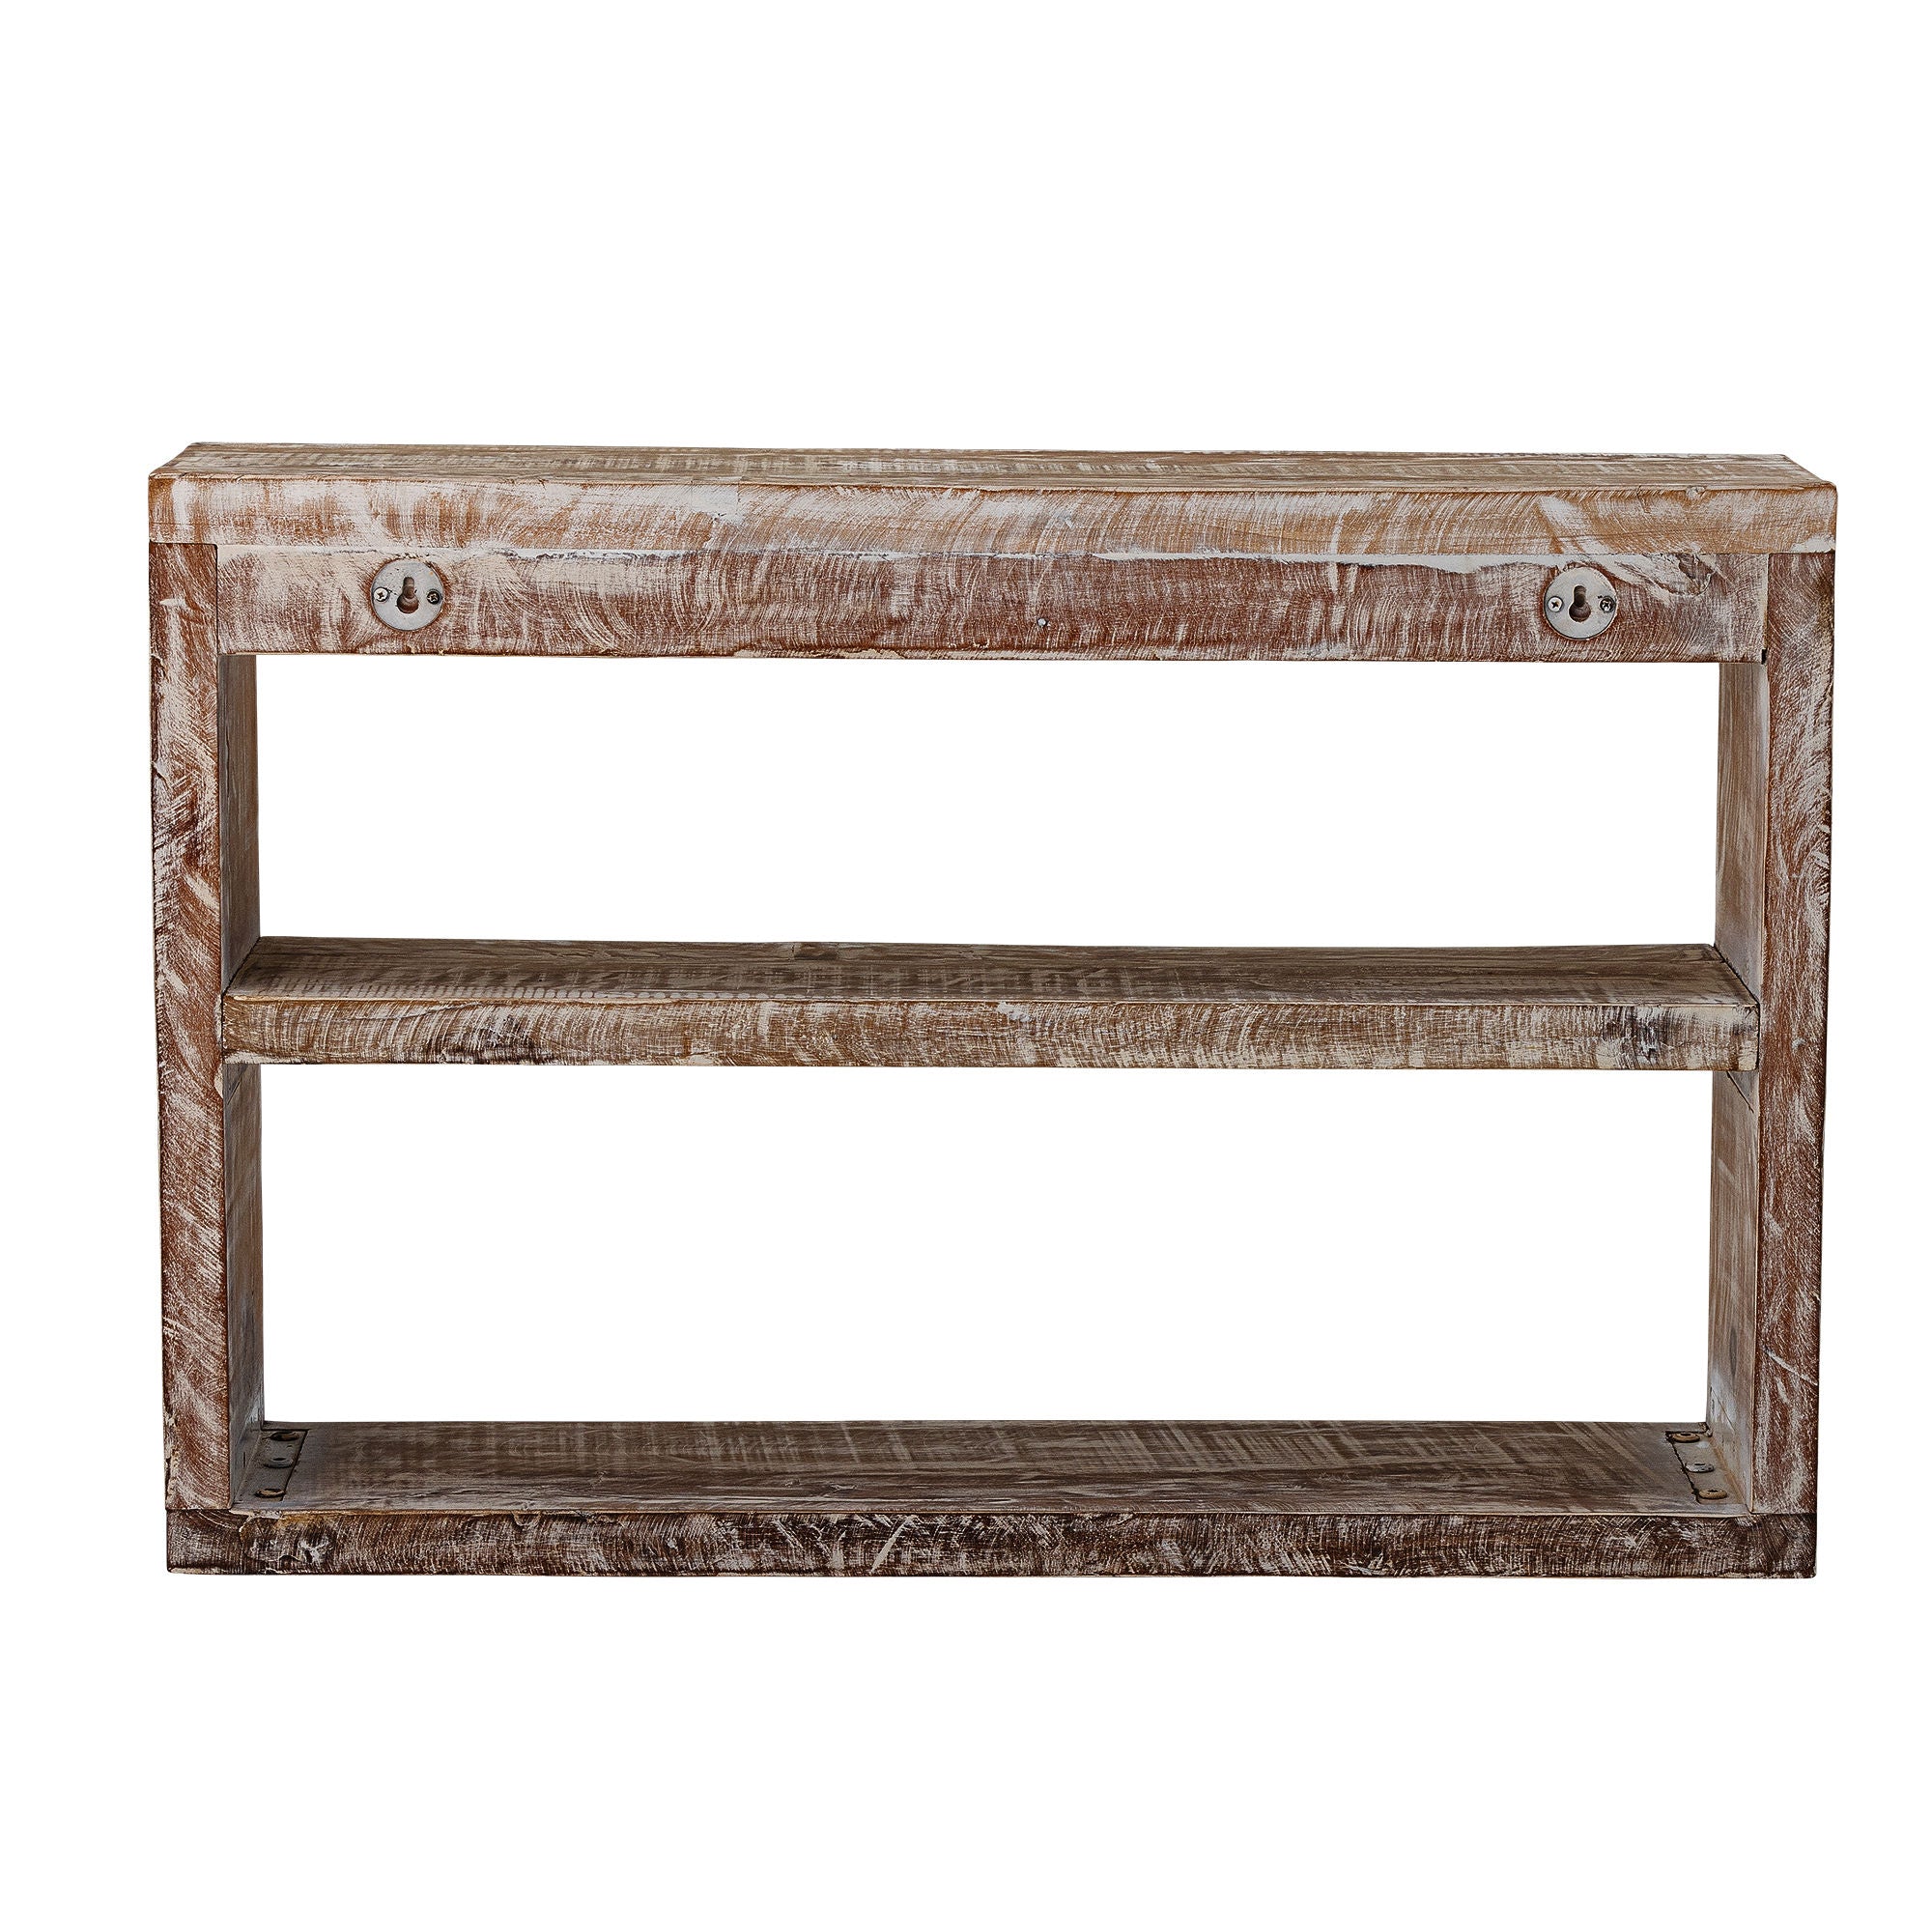 Creative Collection Conde Shelf, Nature, Reclaimed Wood